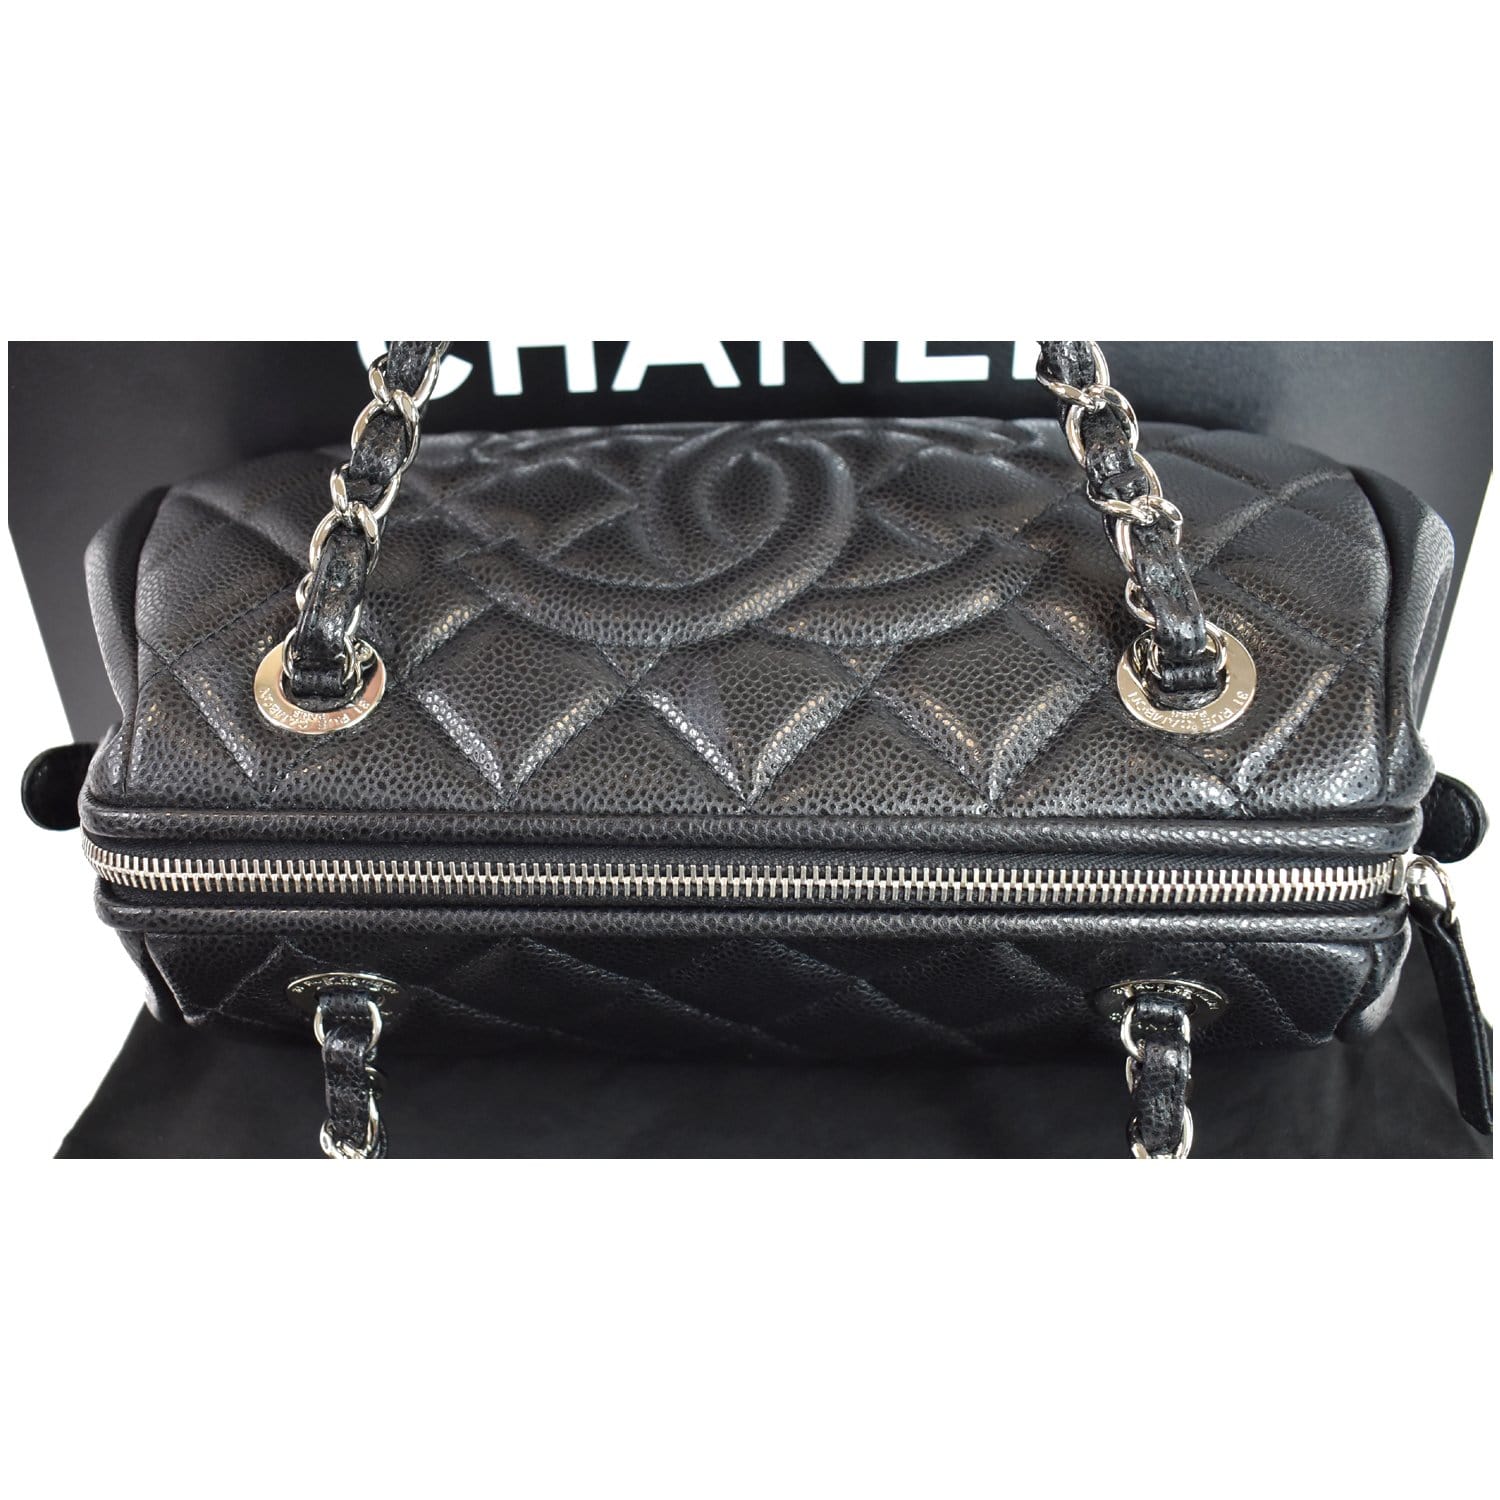 coco chanel bags official website